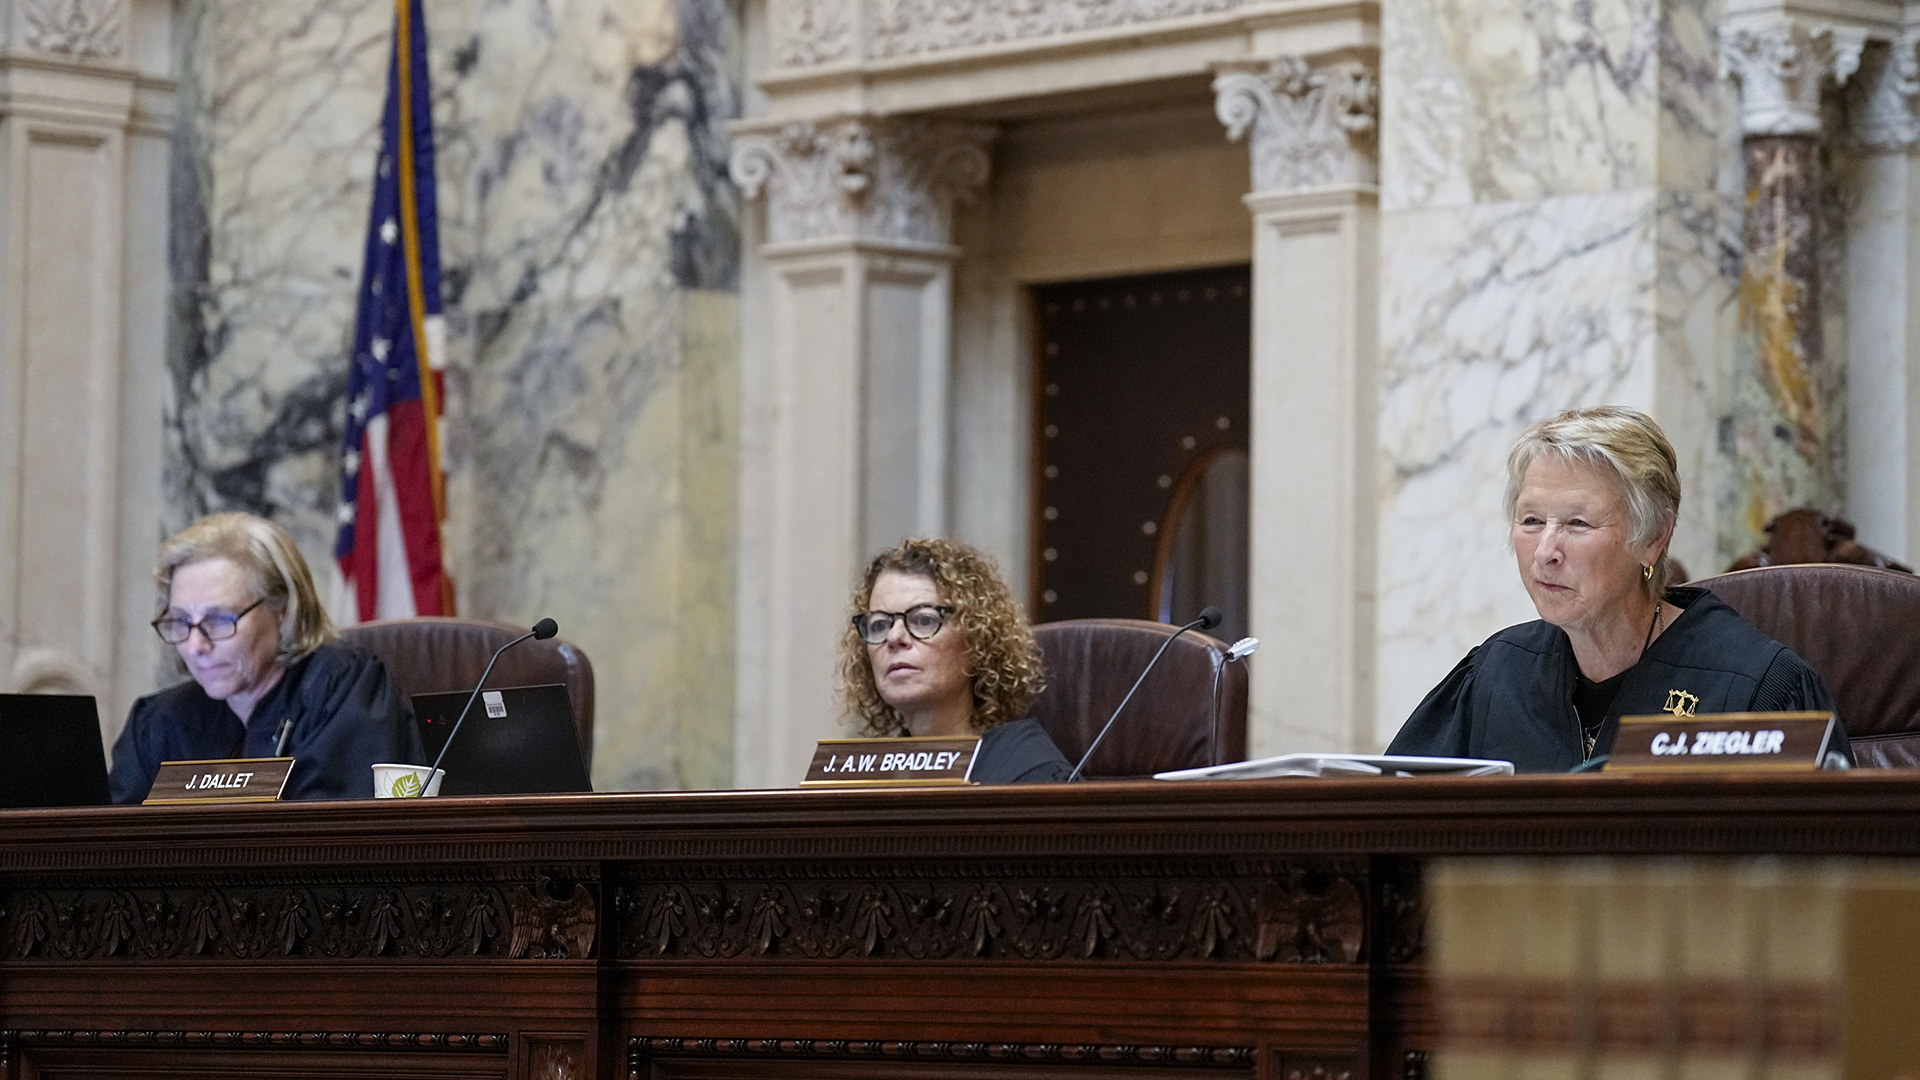 From left to right, Jill Karofsky, Rebecca Dallet, and Ann Walsh Bradley sit at a judicial dais in a row of high-backed leather chairs behind them, in a room with marble masonry, an doorway framed by square pillars and a lintel, and a U.S. flag.